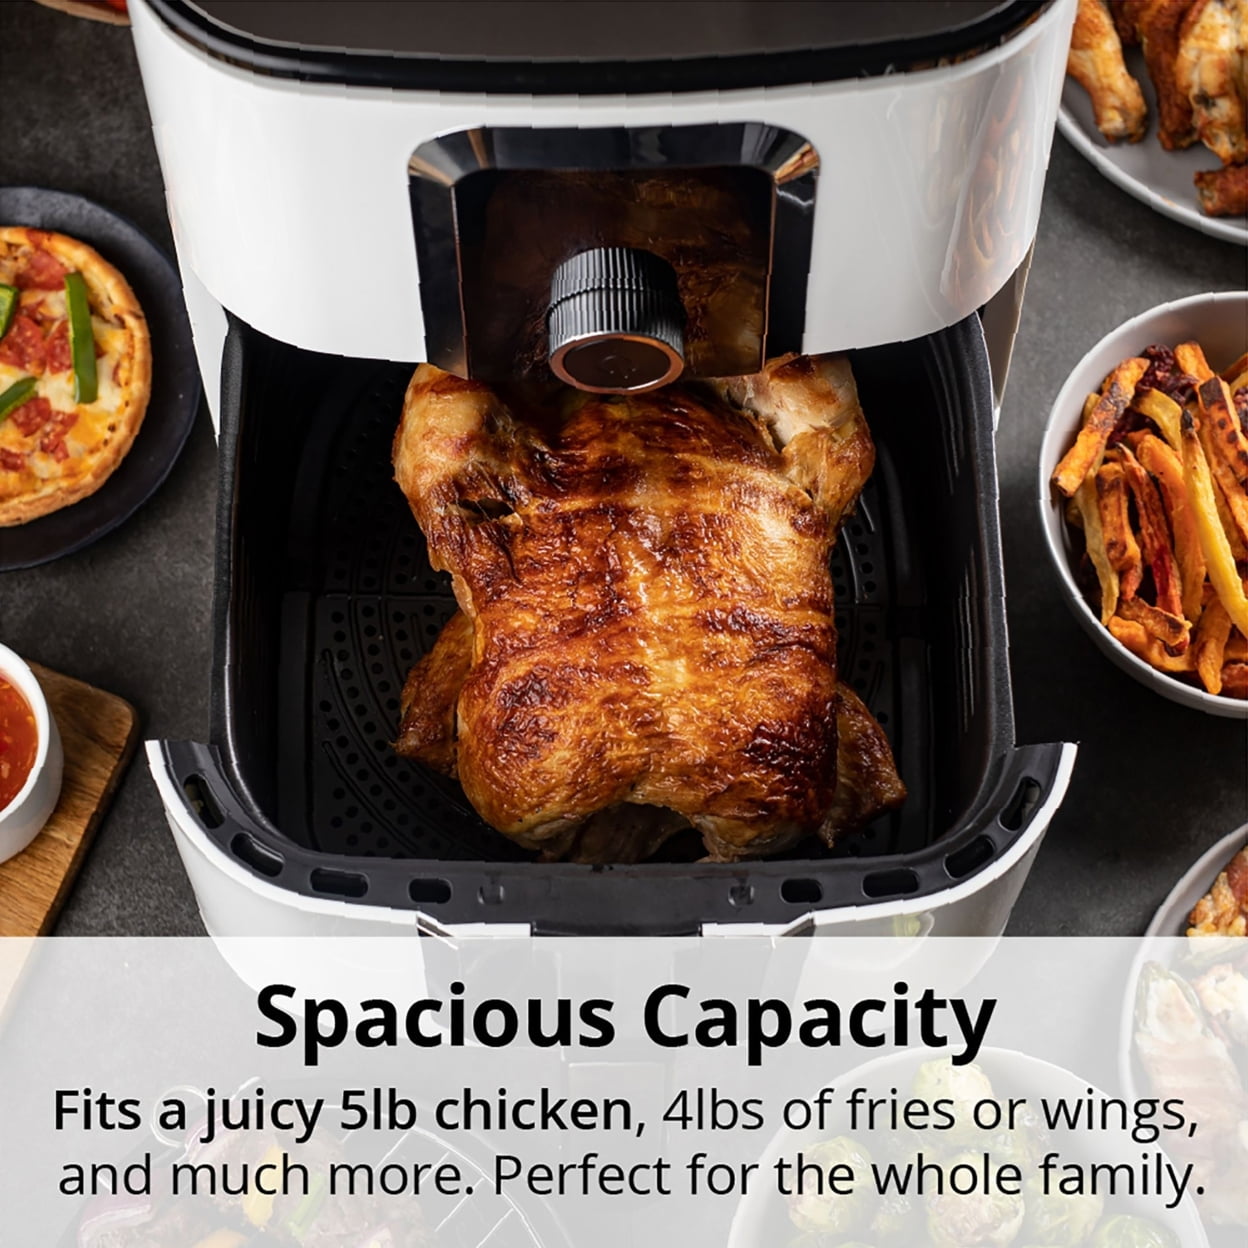 Aria 3 Qt. Teflon-free Ceramic Air Fryer Oilless Small Oven Easy To Use  Great For Dorms & Offices Bonus Recipe Book Included : Target